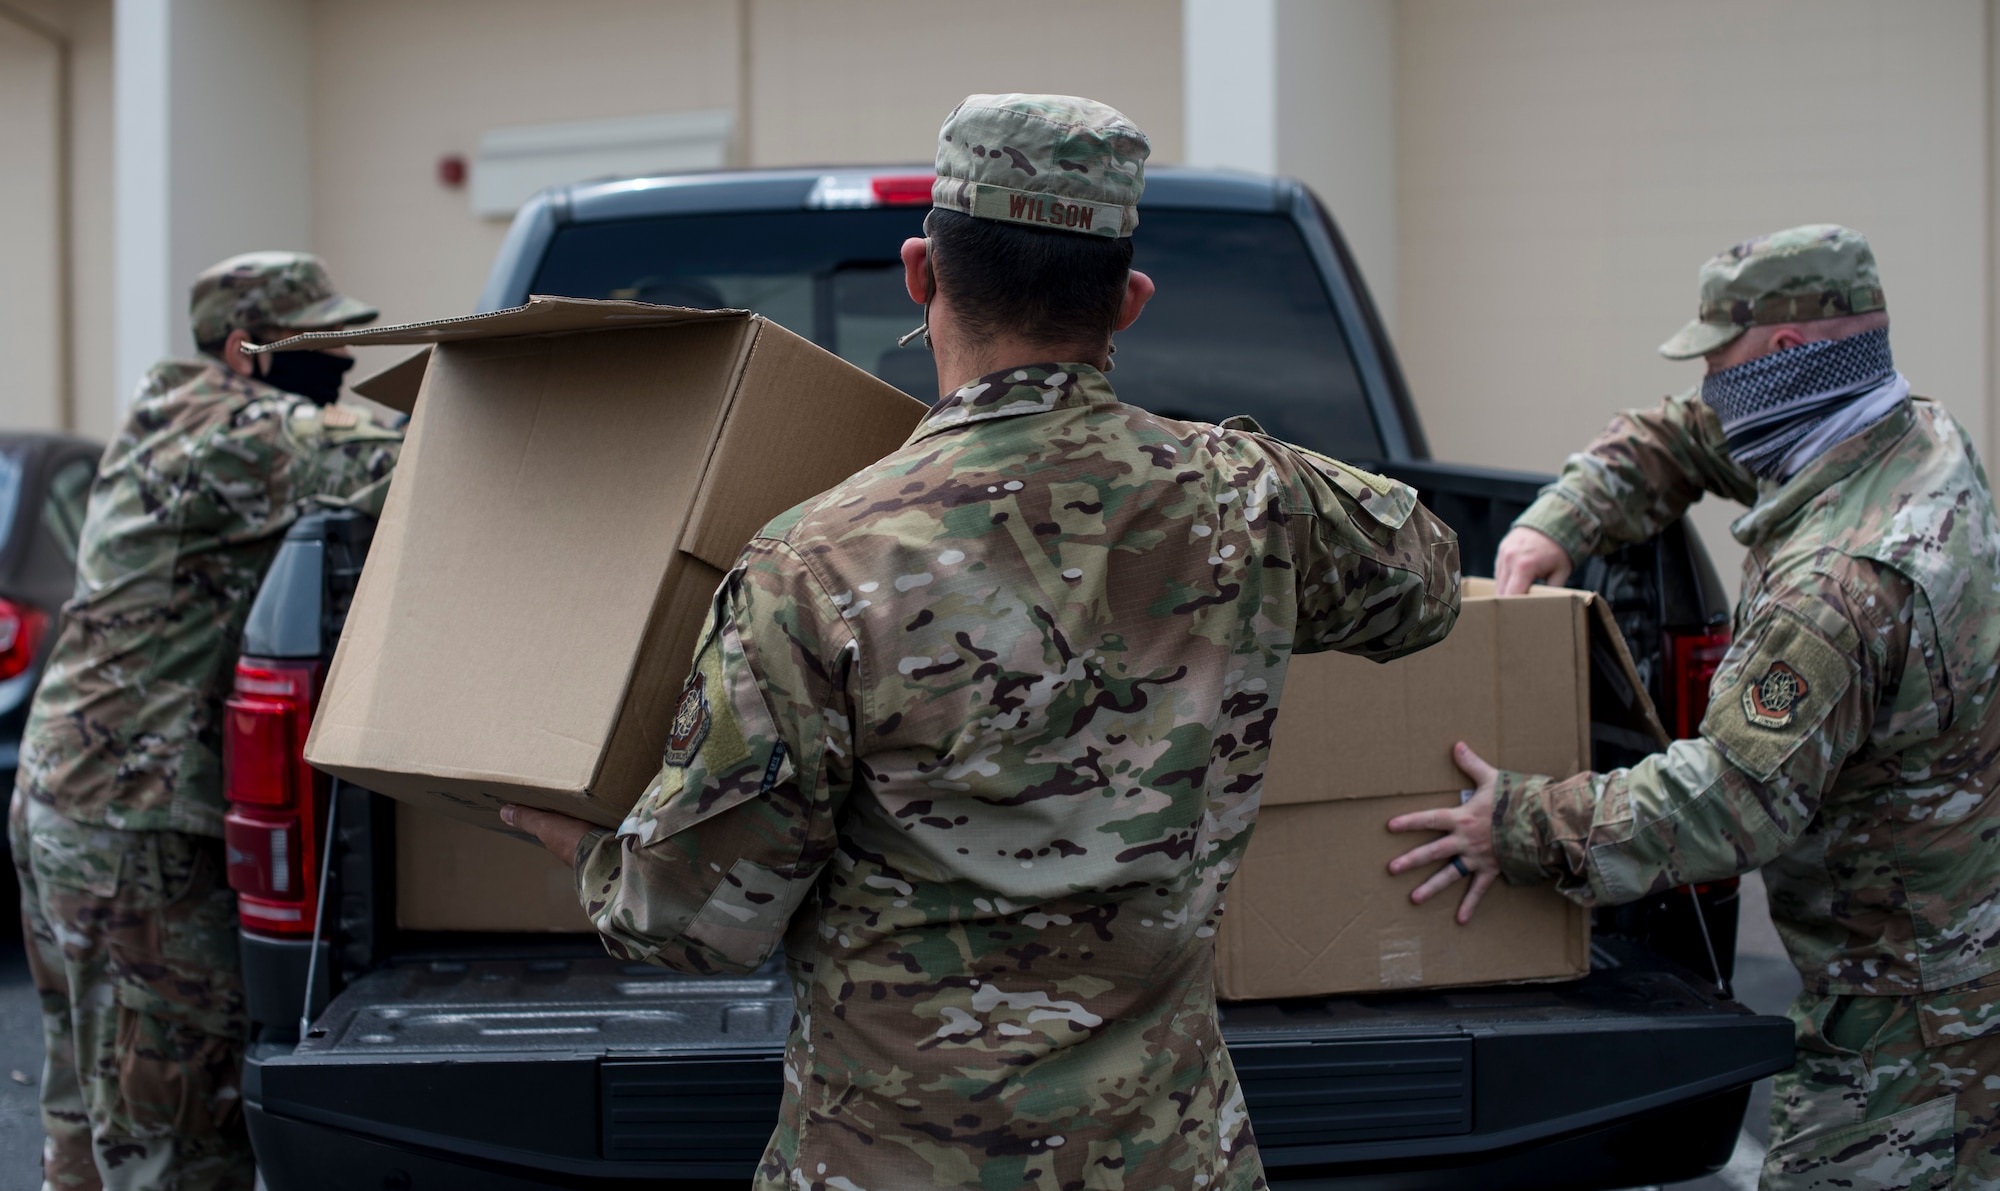 First sergeants from around the 6th Air Refueling Wing load care packages into a truck outside the Military and Family Readiness Center (MFRC) at MacDill Air Force Base, Fla., April 17, 2020.